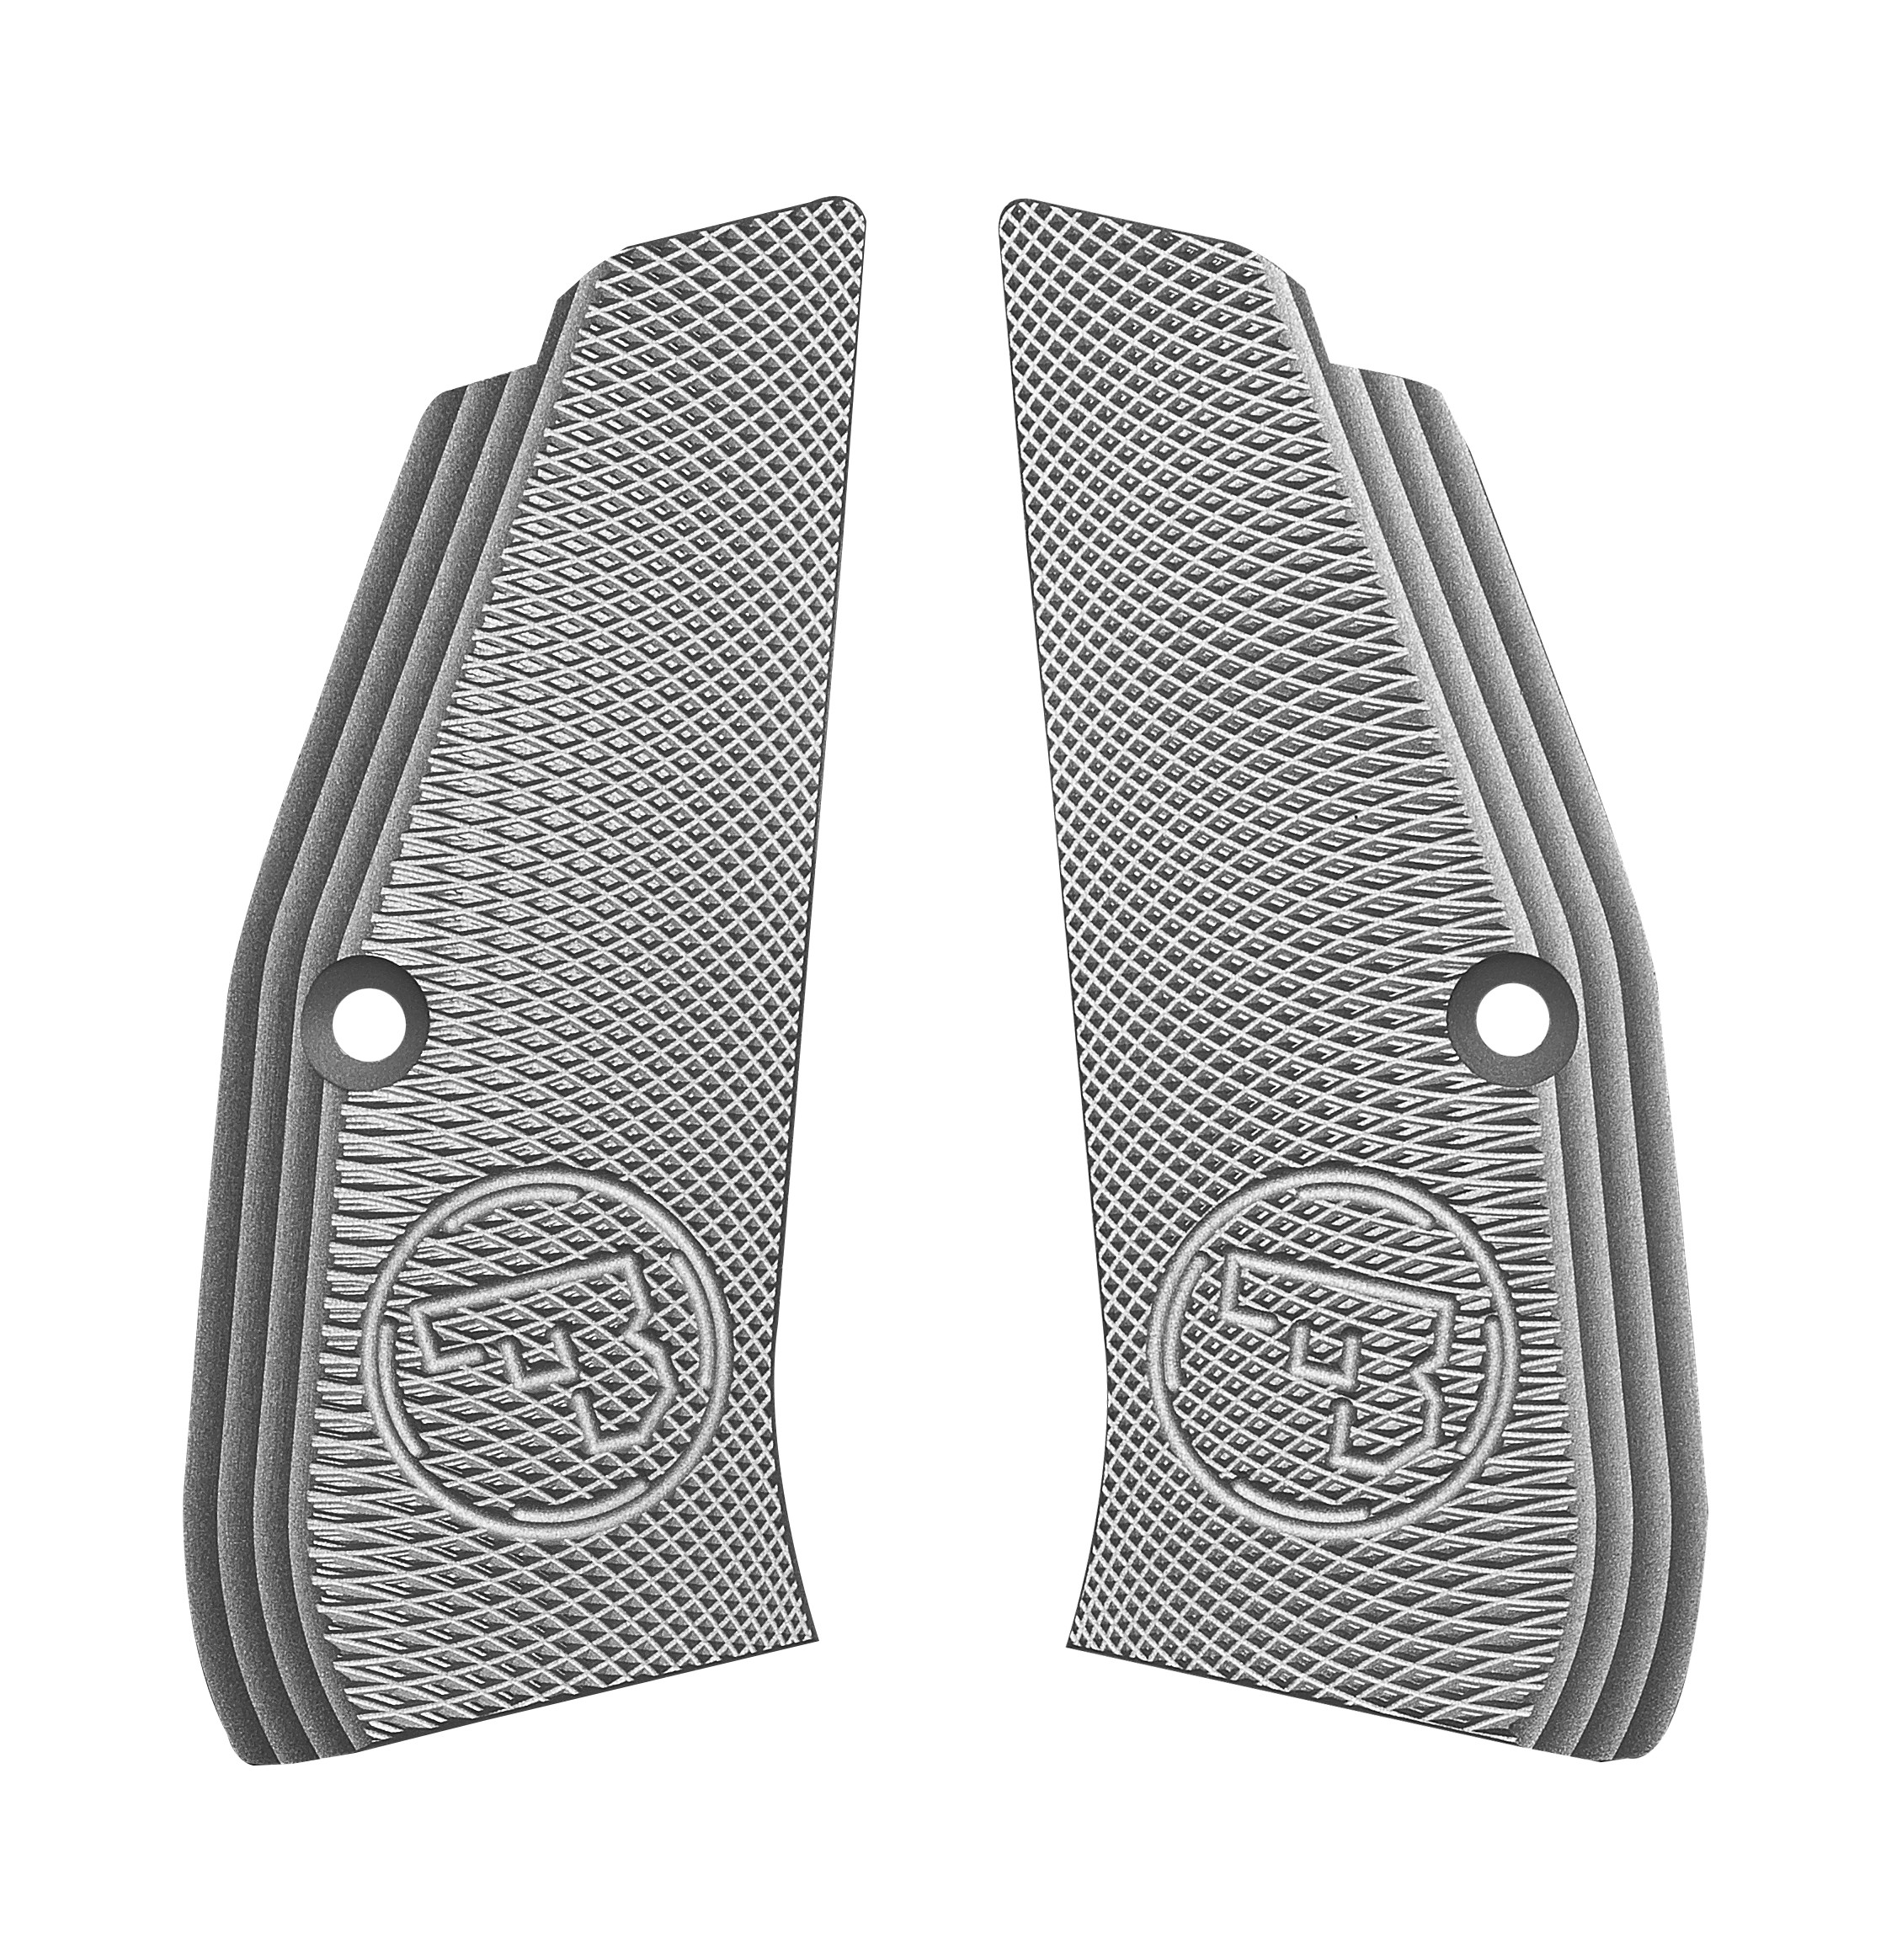 CZ 75 Grooved Grips without Funnel - Long - Colour Options - CZUB®